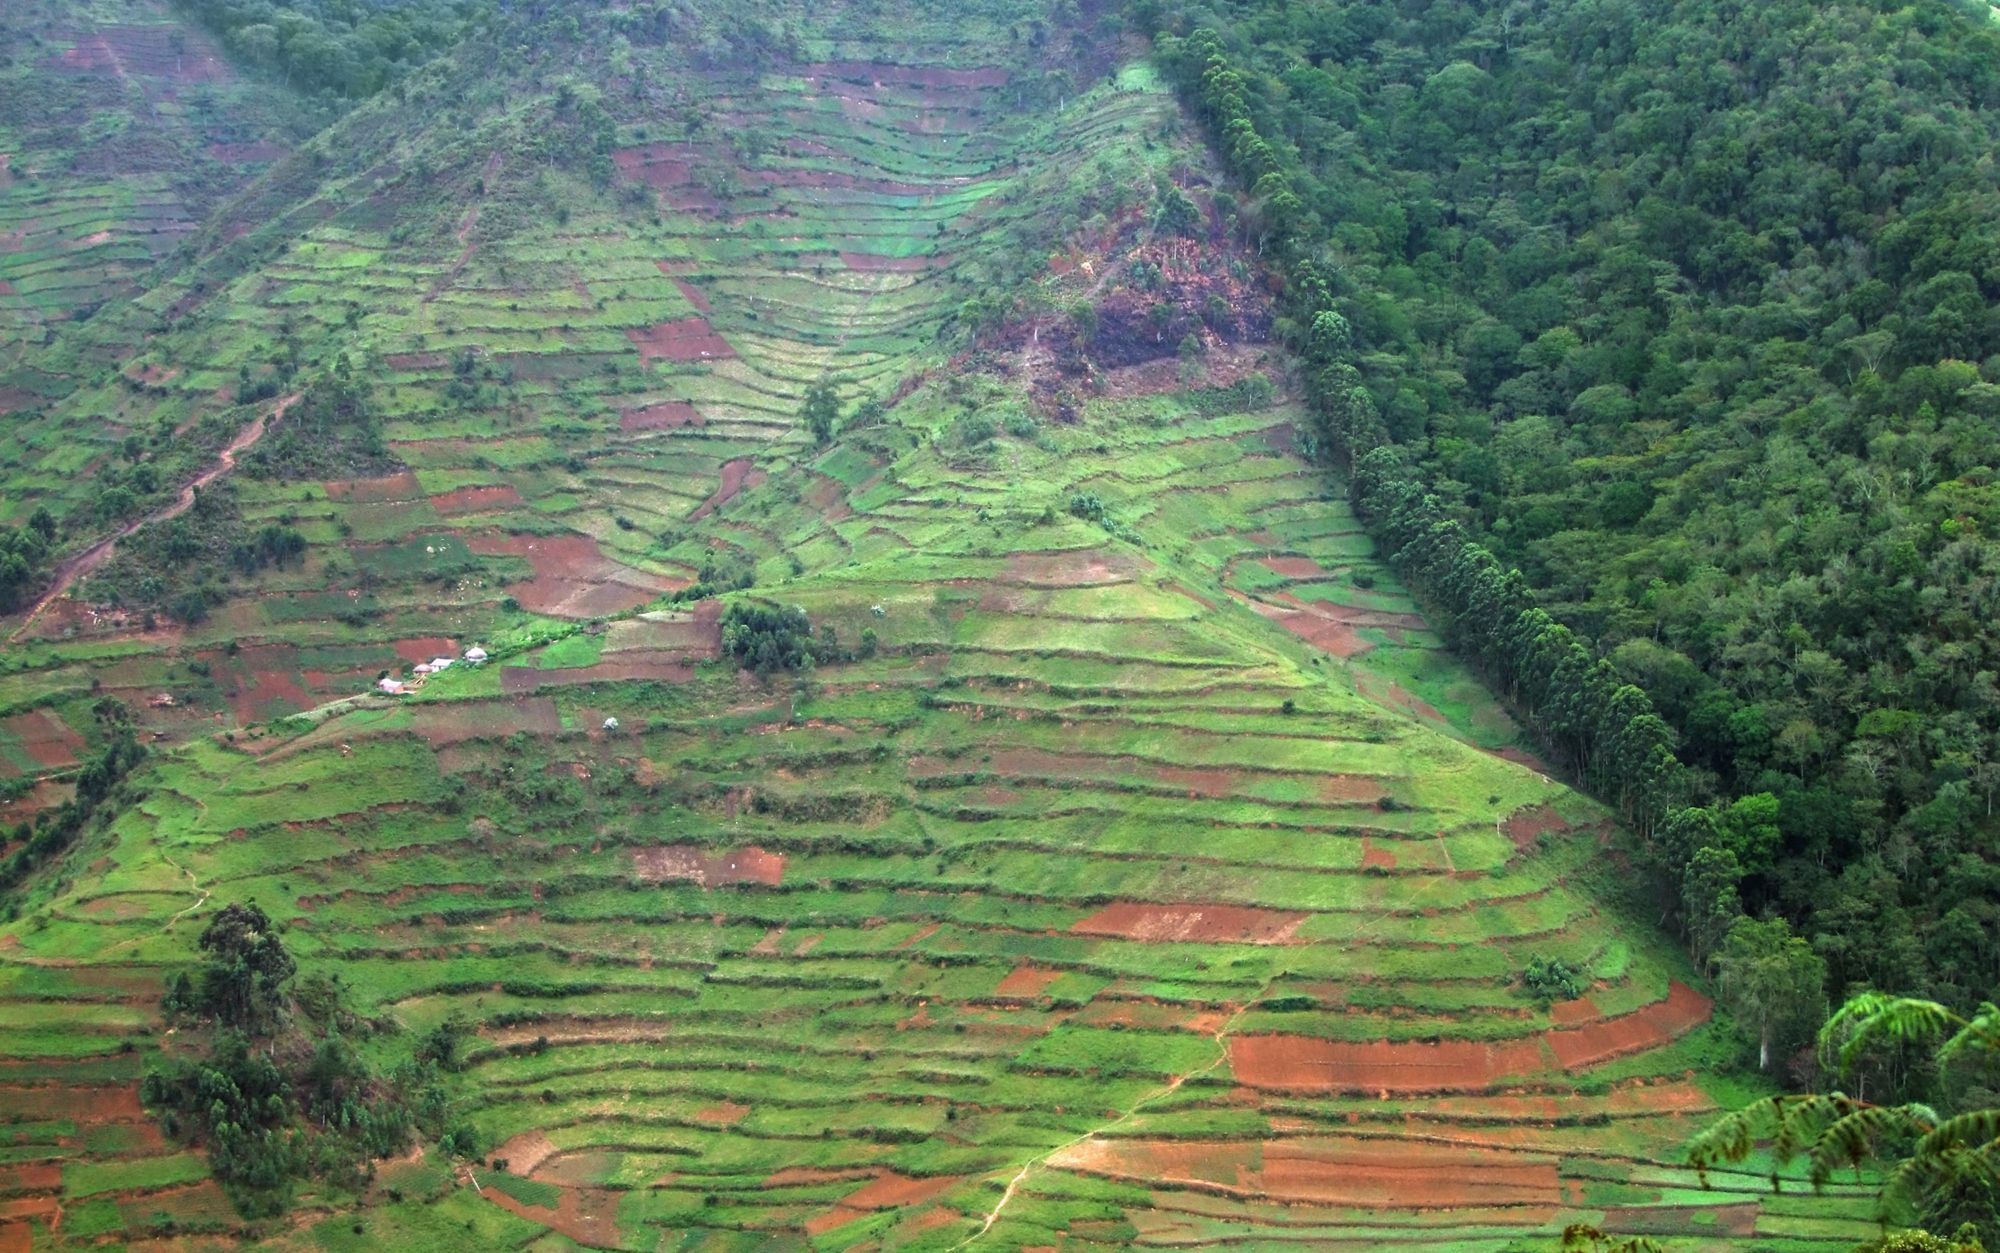 An aerial view of the border of Bwindi Impenetrable Forest, Uganda